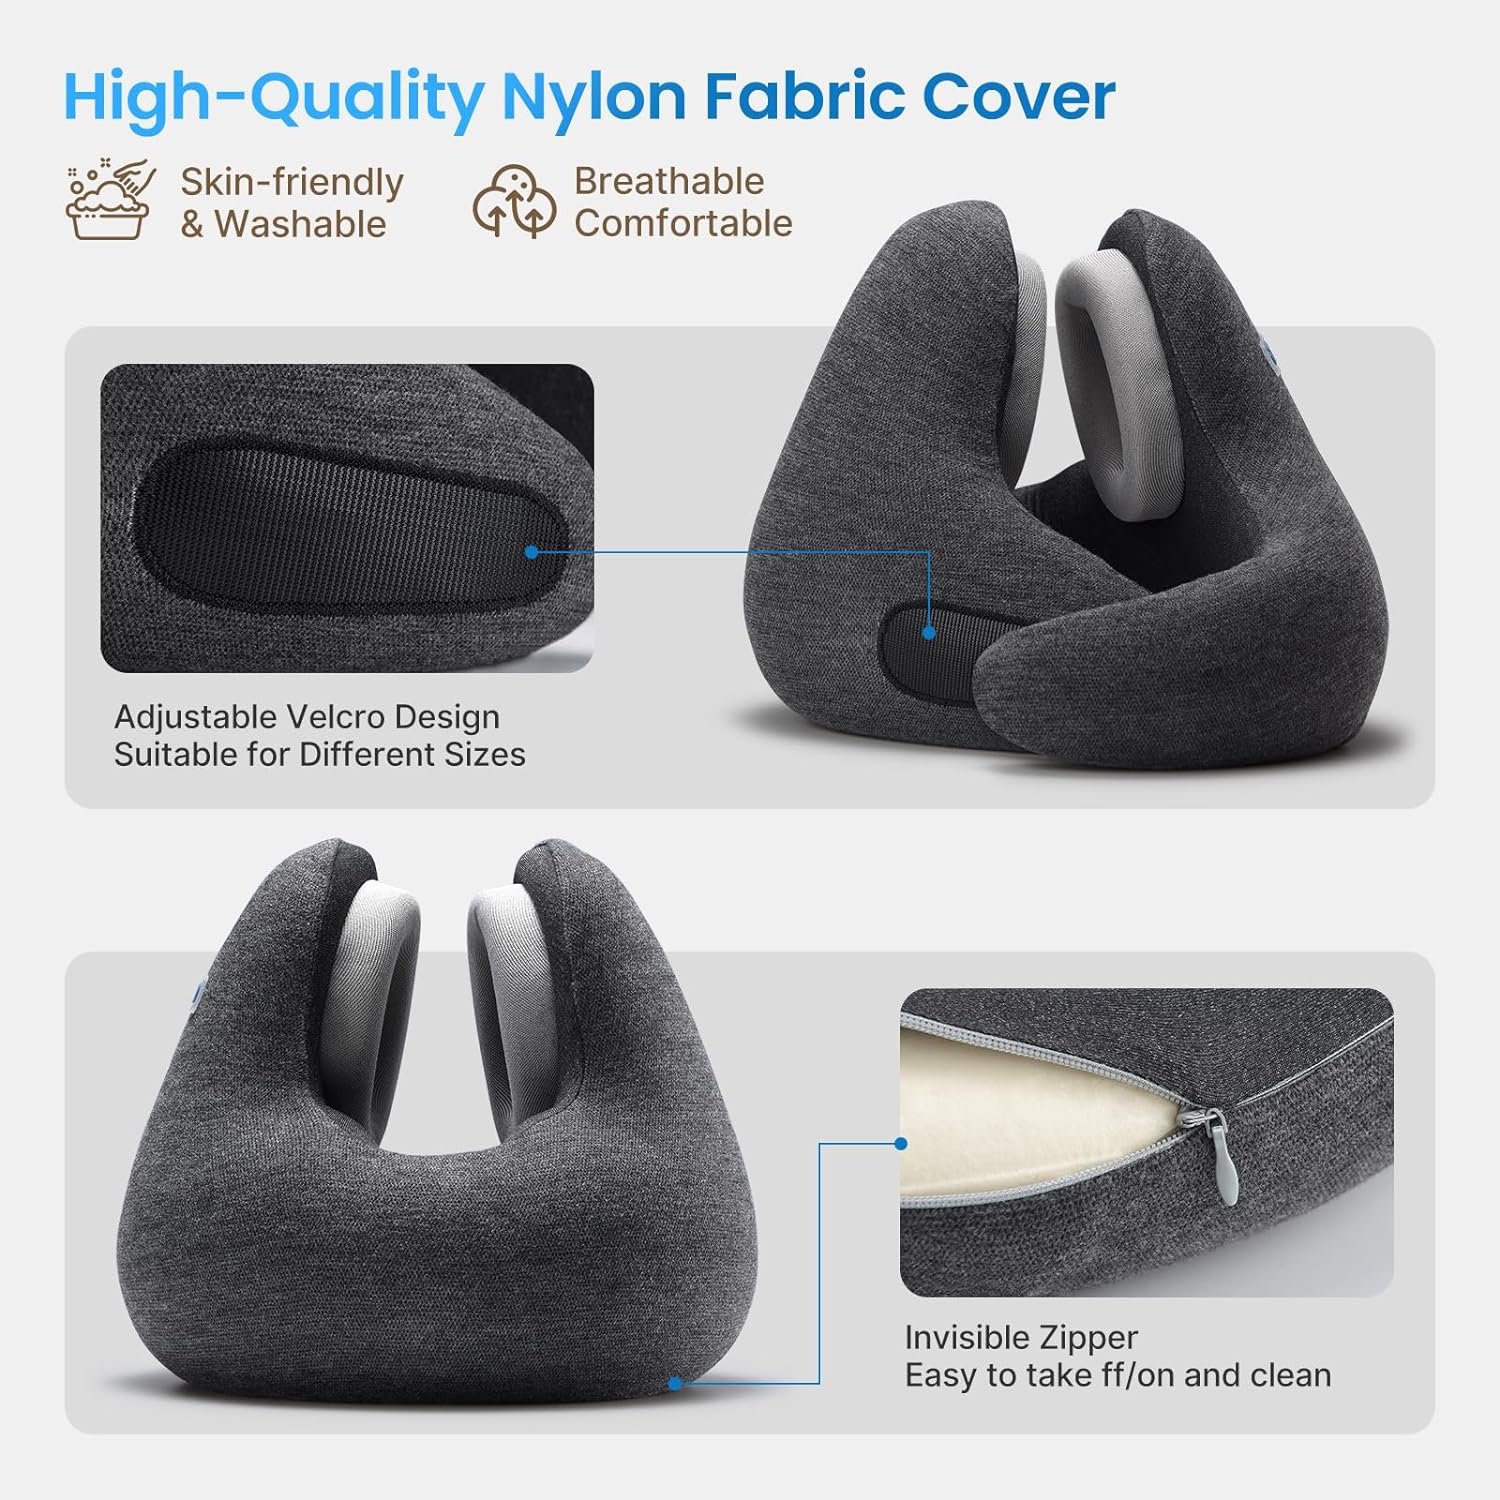 Promotional image of a high-quality, gray RENPHO Neck Pillow featuring skin-friendly, washable fabric, adjustable velcro design, breathable comfort, and an invisible zipper for easy cleaning. Four views show Renpho EU.